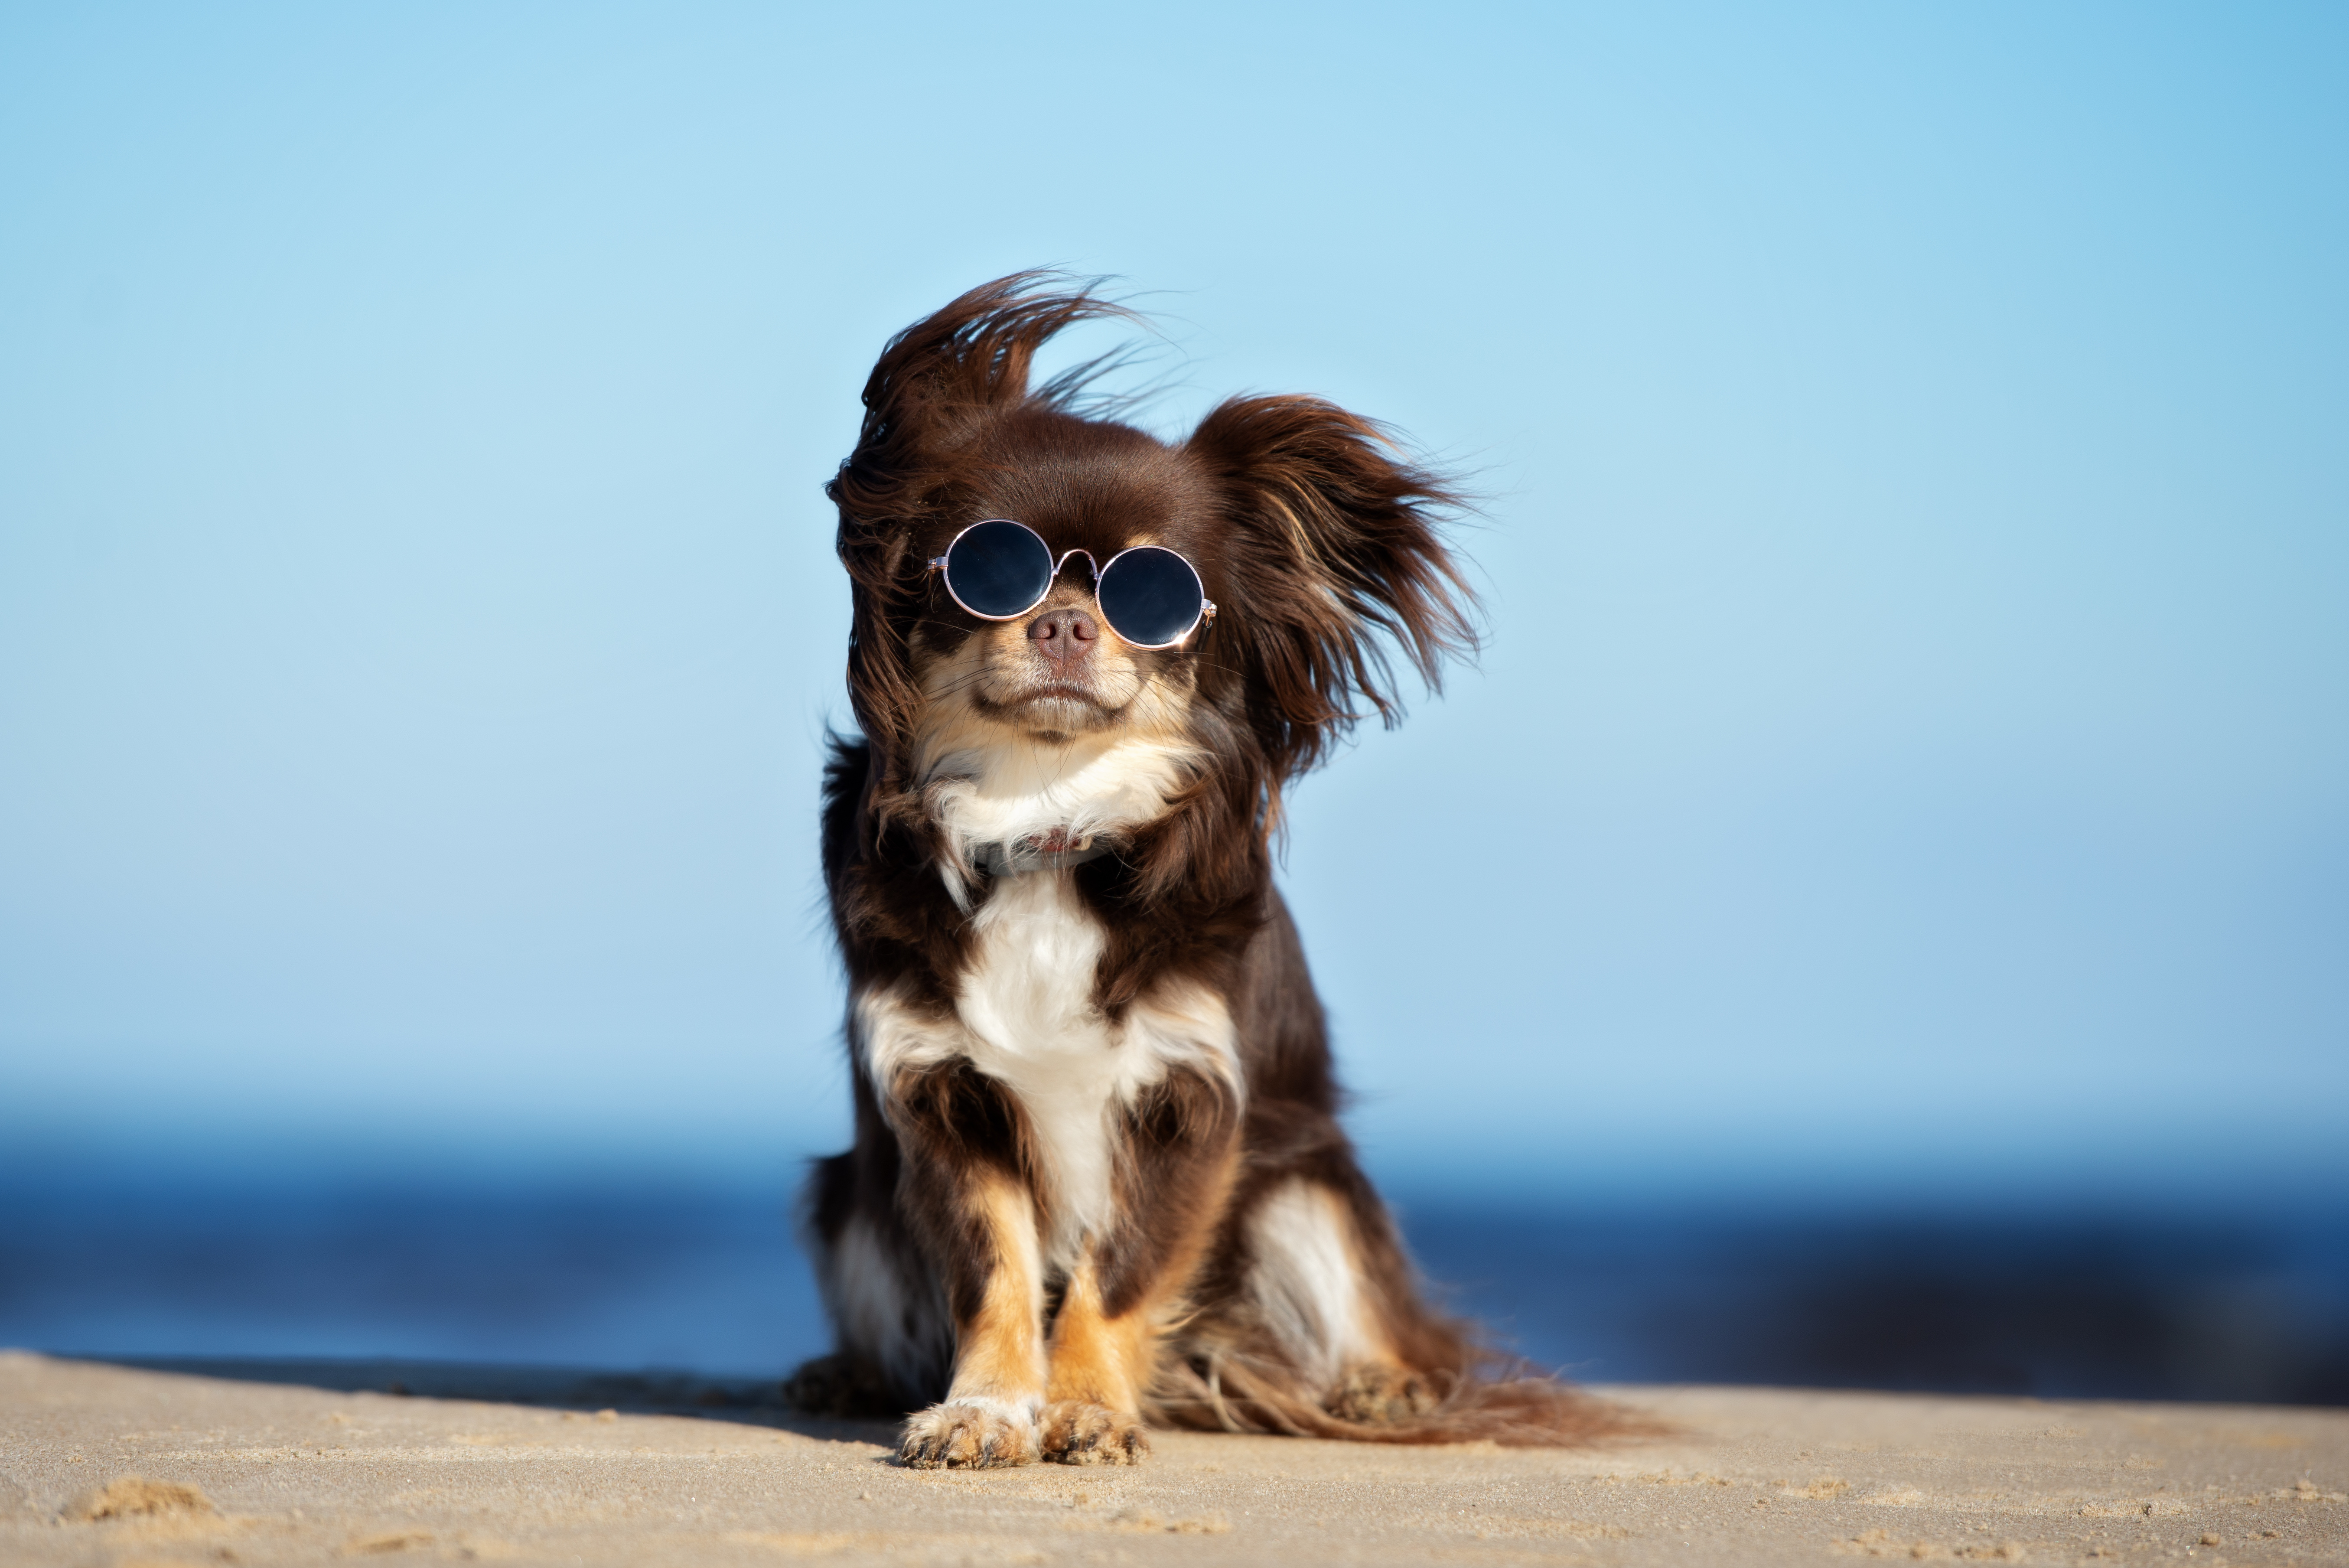 httpsbxsliderhome page slideshowfunny chihuahua dog in sunglasses posing on a beach